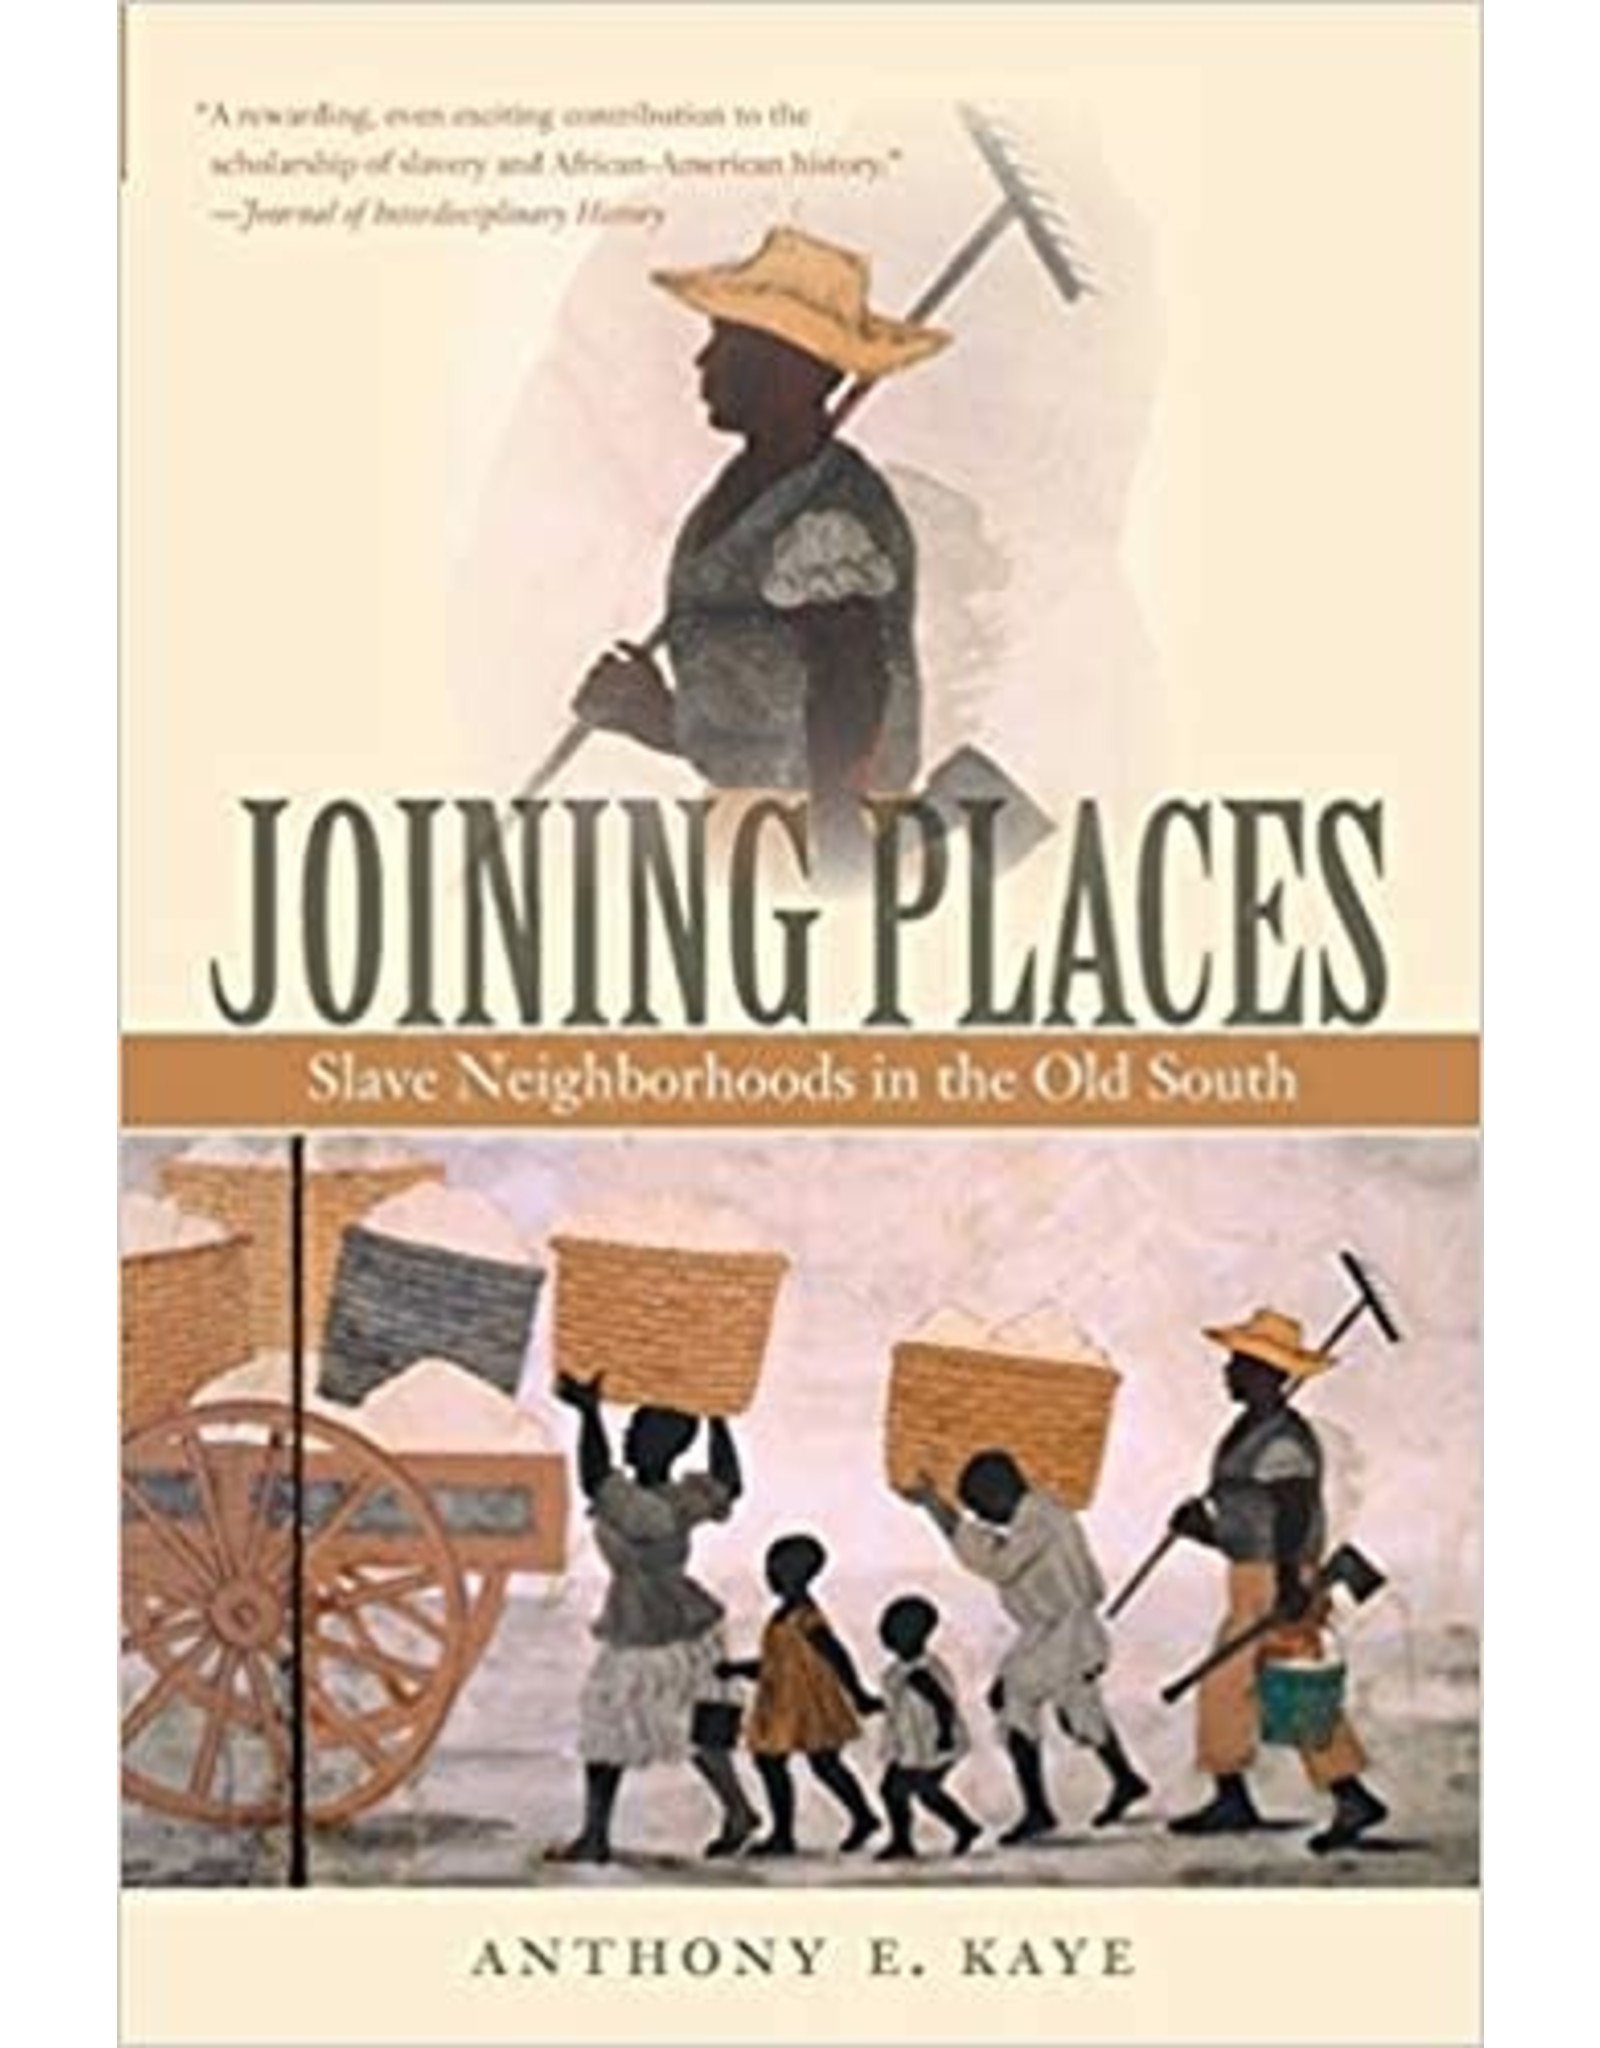 Non-Fiction: Slavery Joining Places